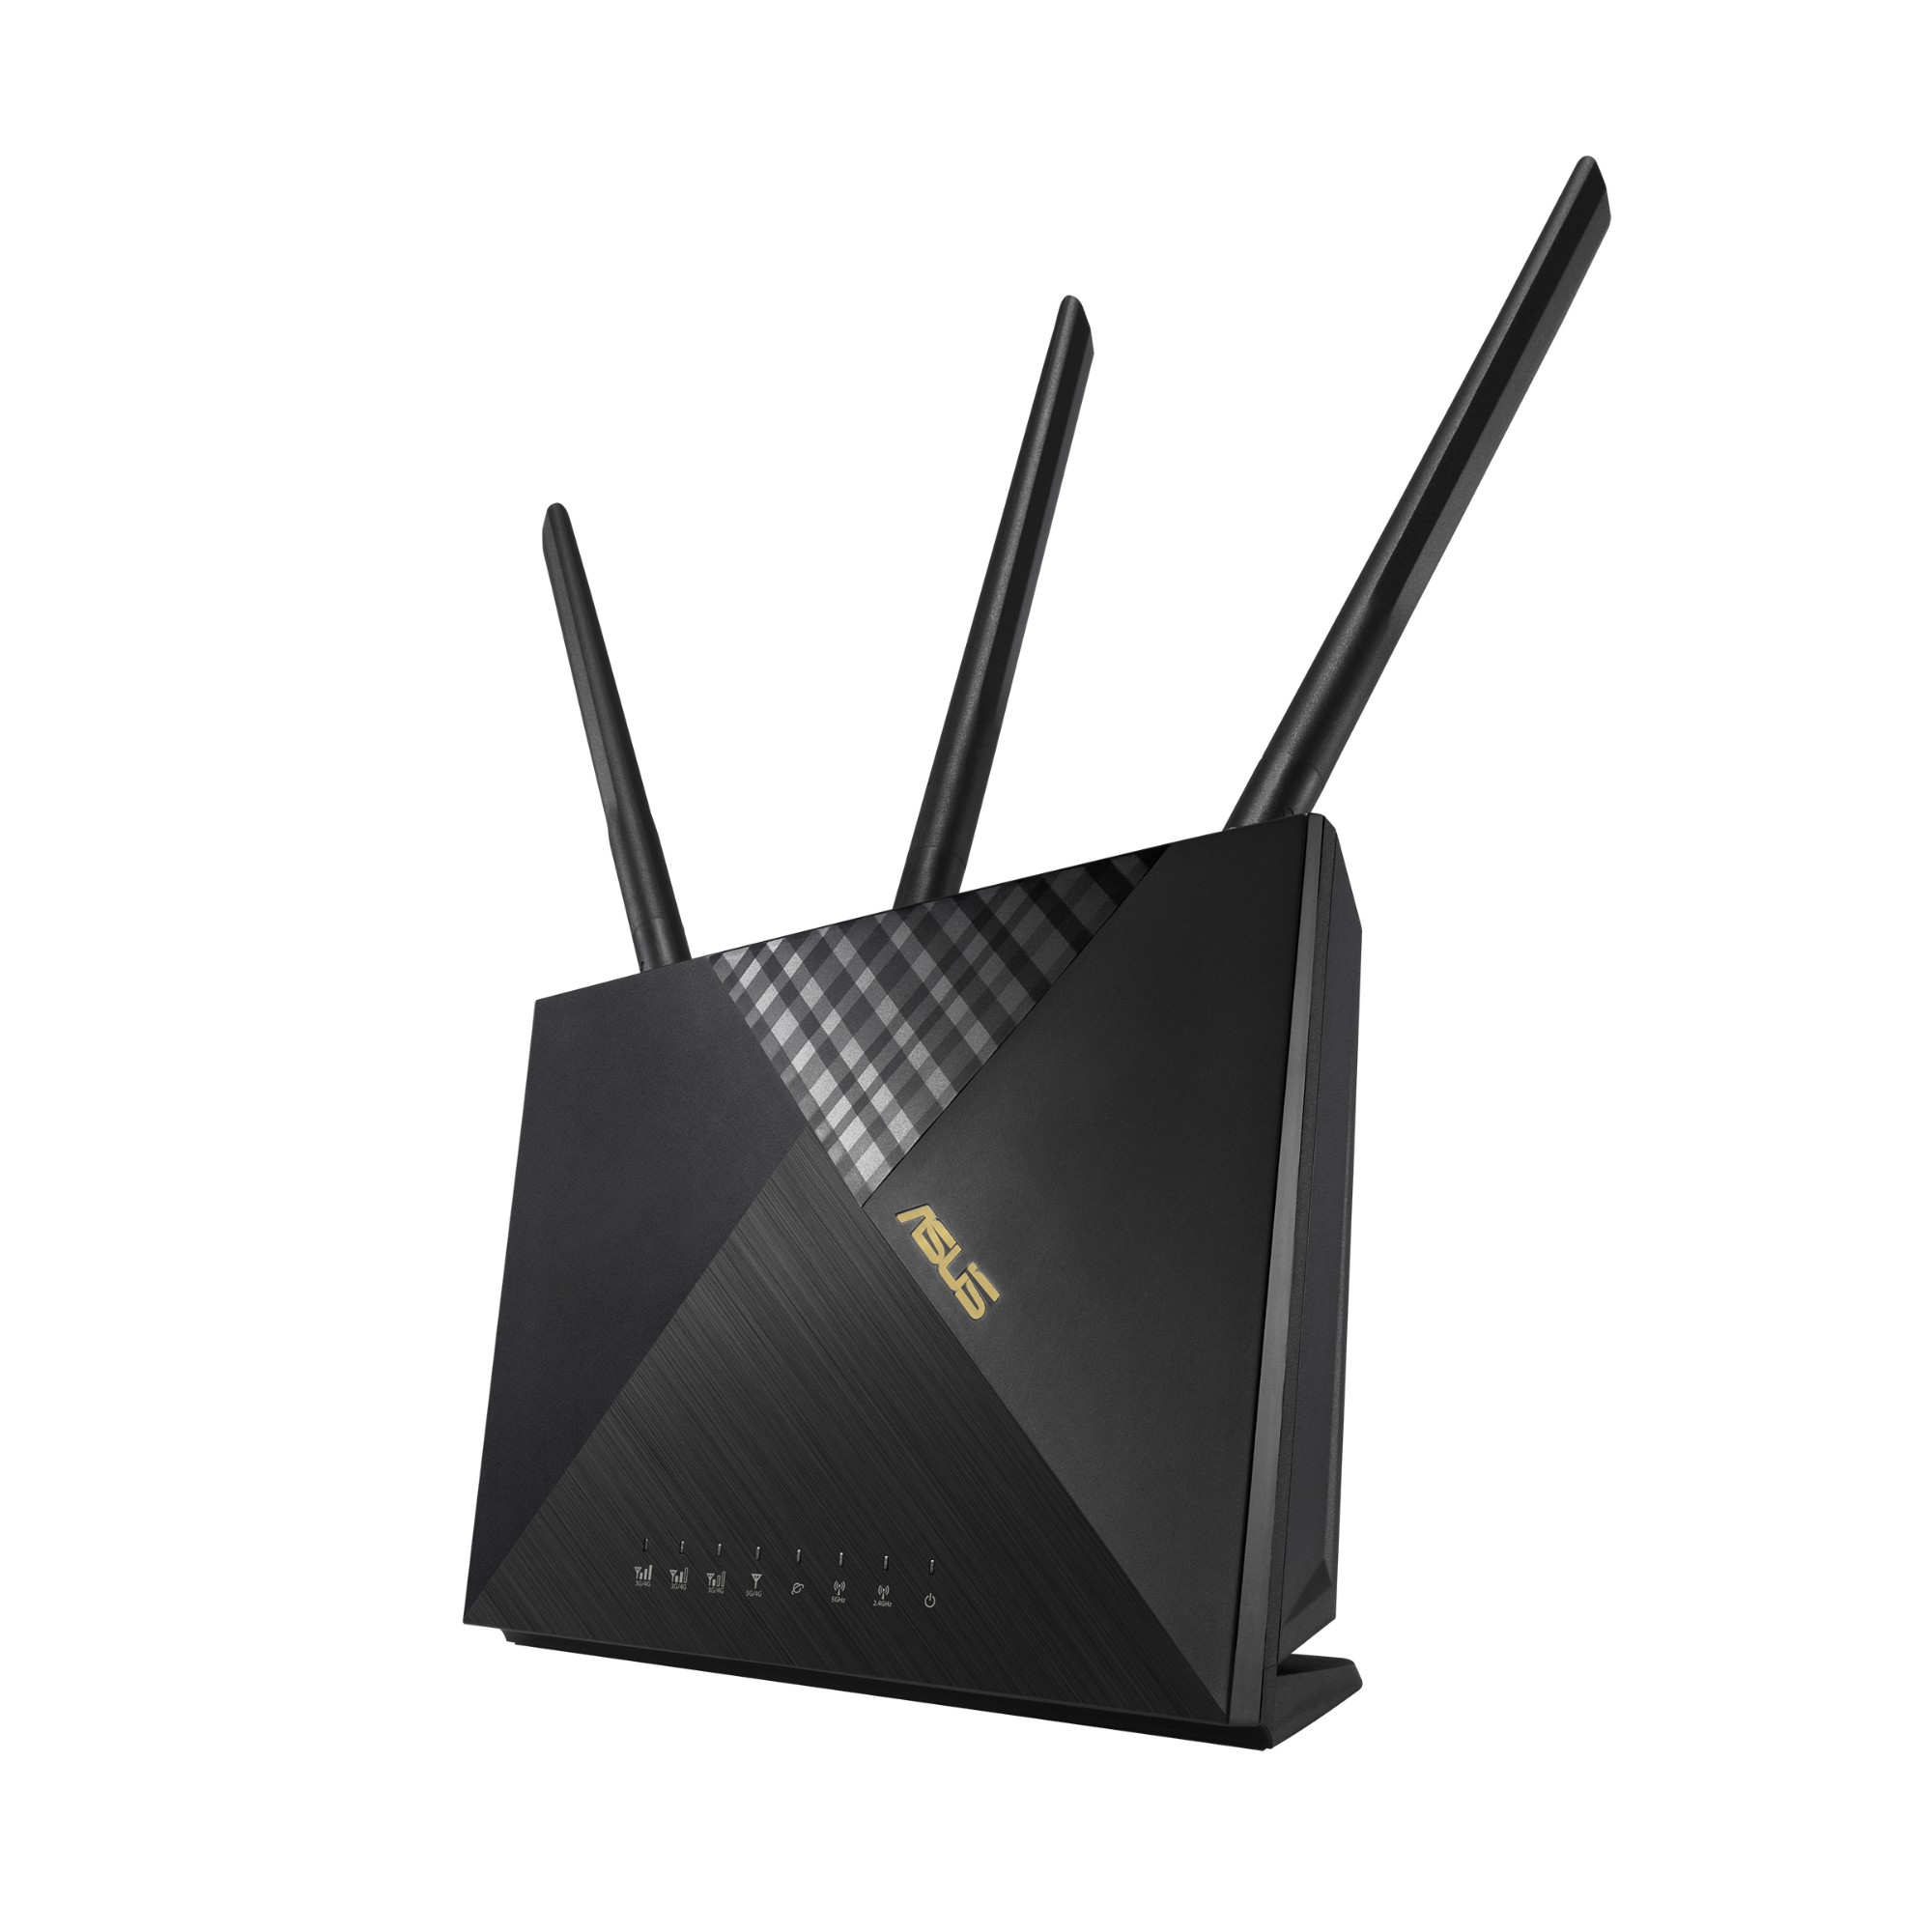 ASUS 4G-AX56 wireless router Gigabit Ethernet Dual-band (2.4 GHz / 5 GHz) 5G Black